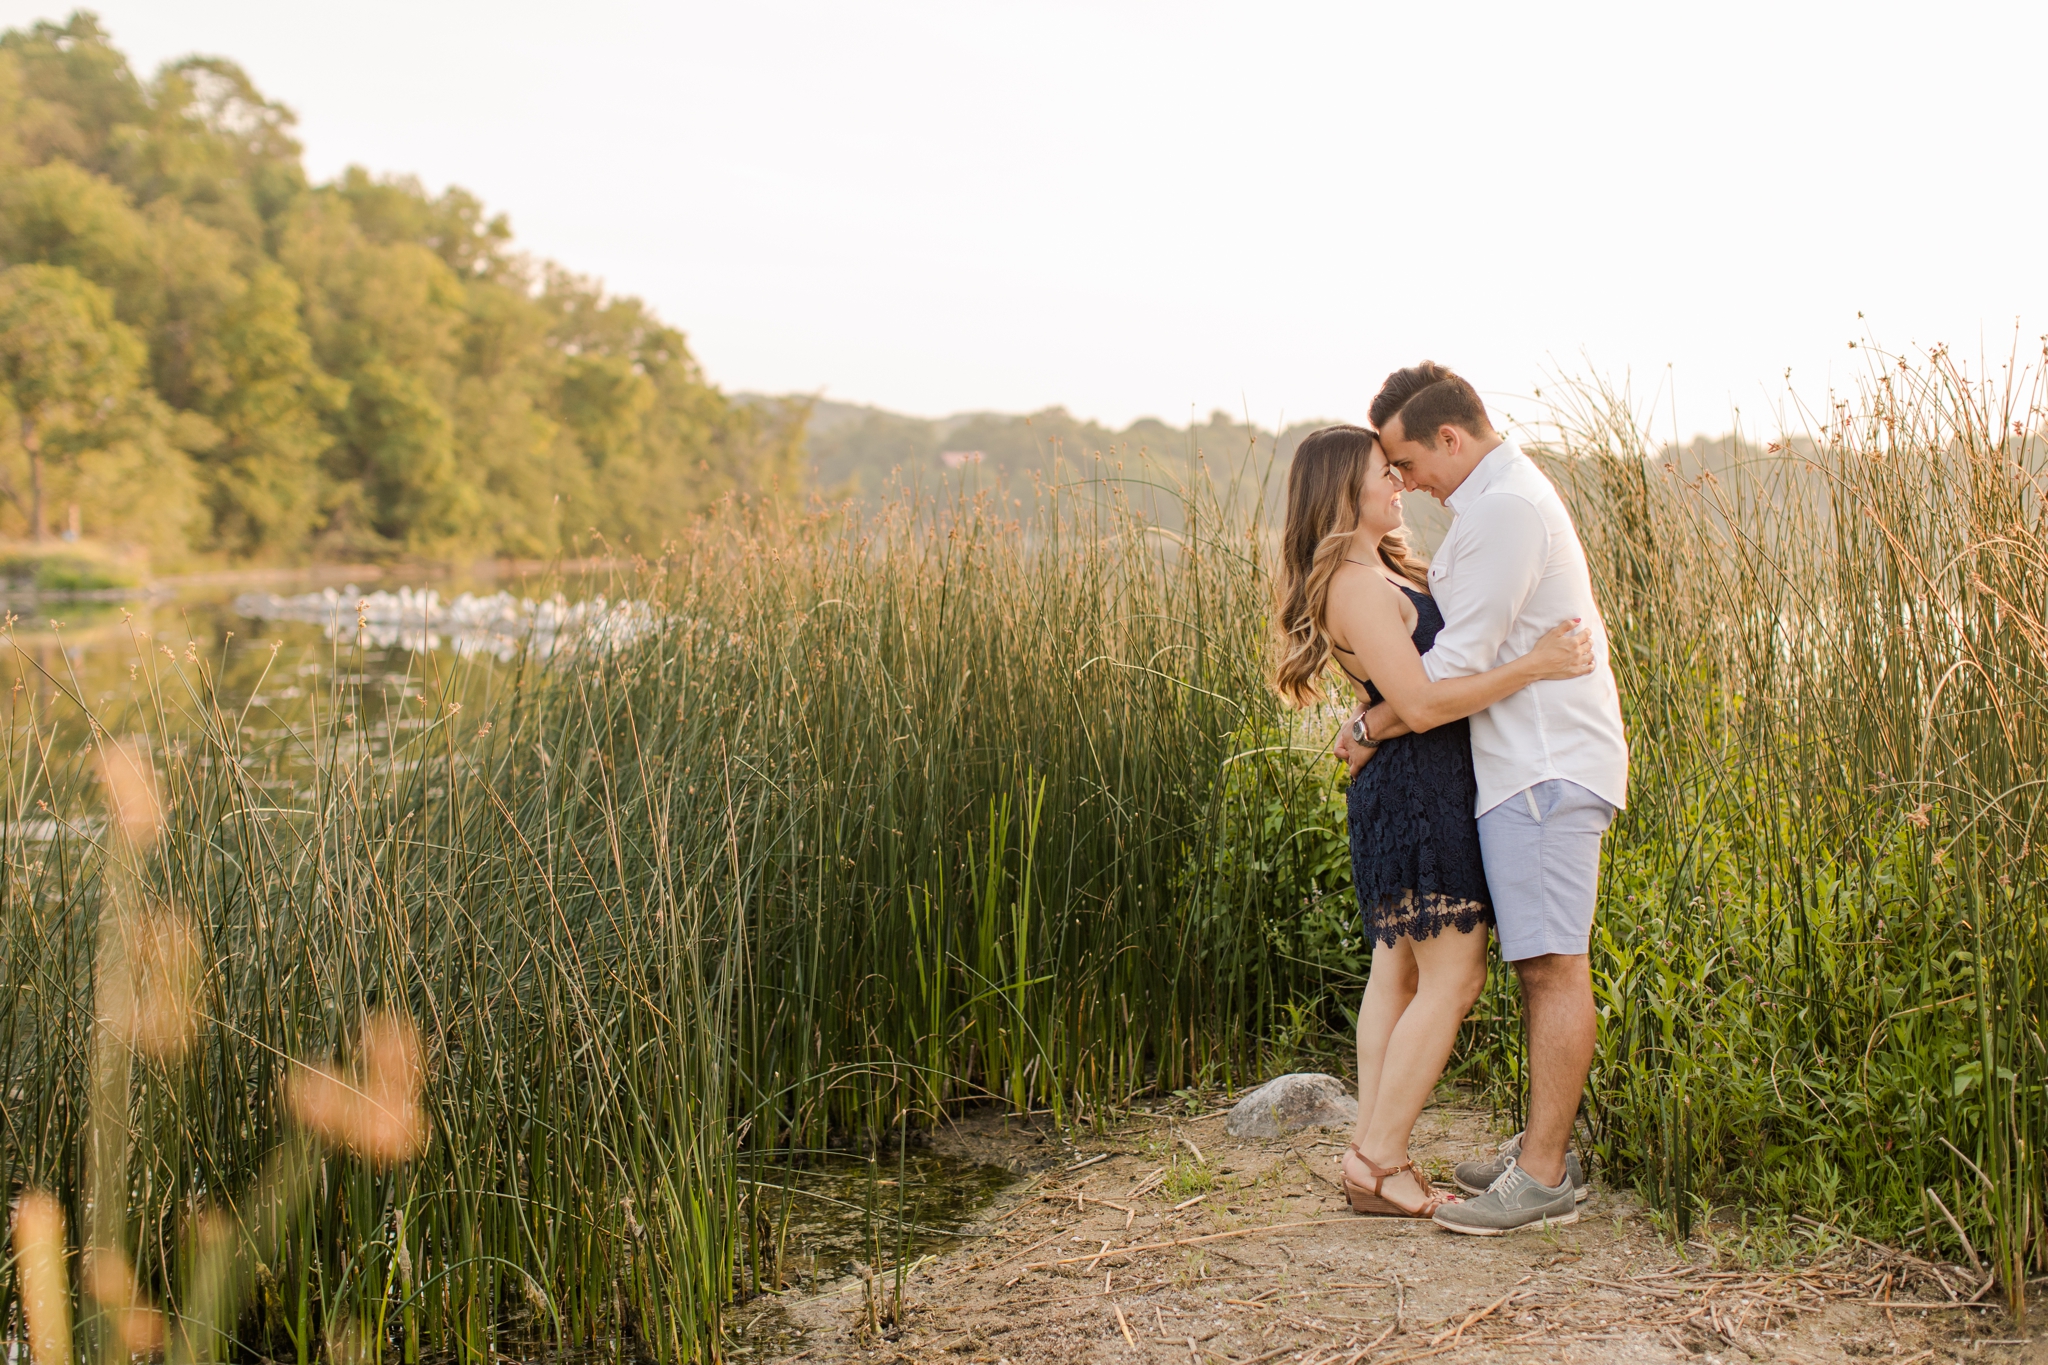 Maplewood State Park Engagement Photos, Engagement photos at the lake, Brittney and Caleb